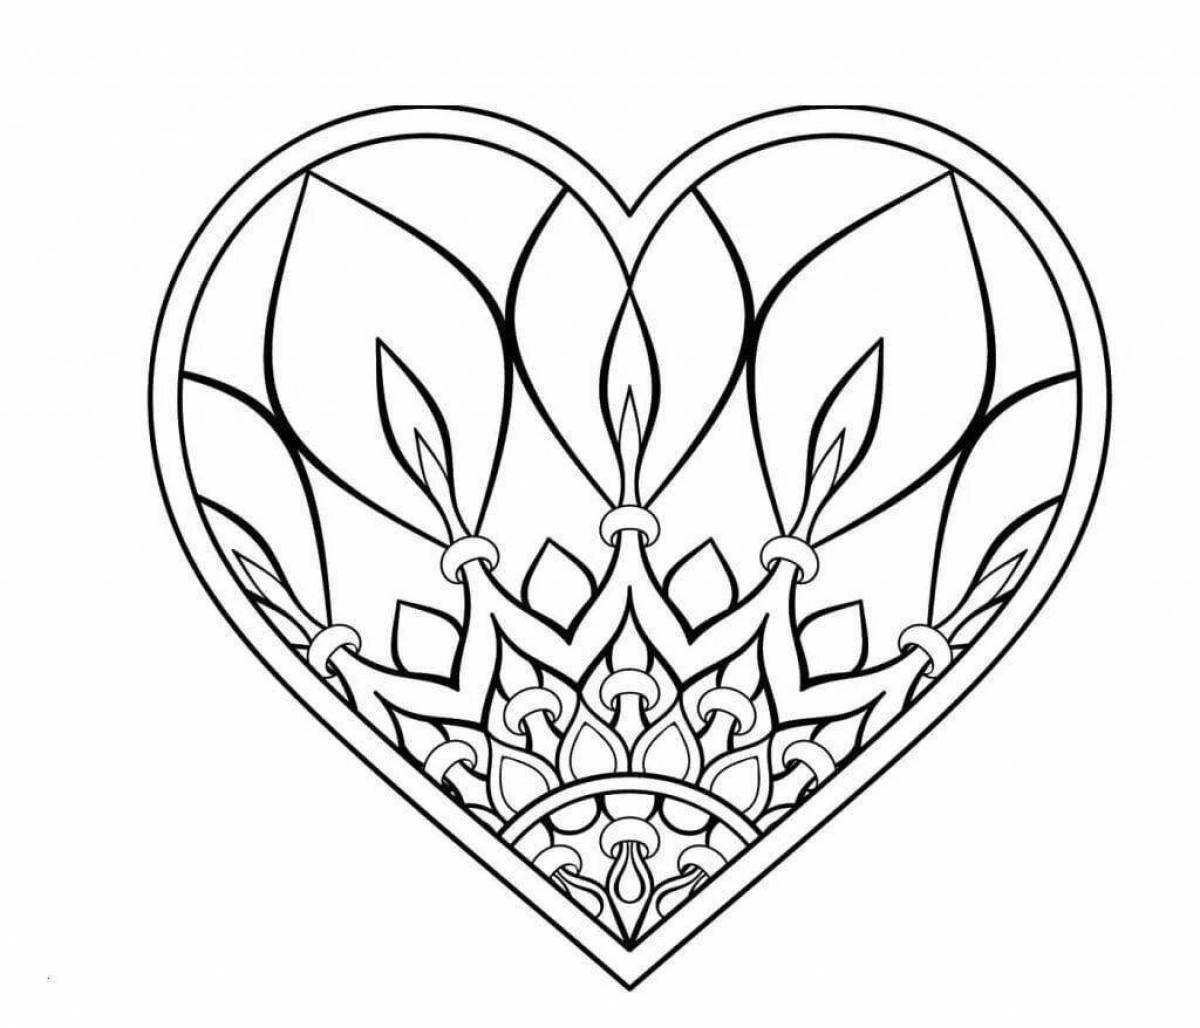 Colored heart coloring page